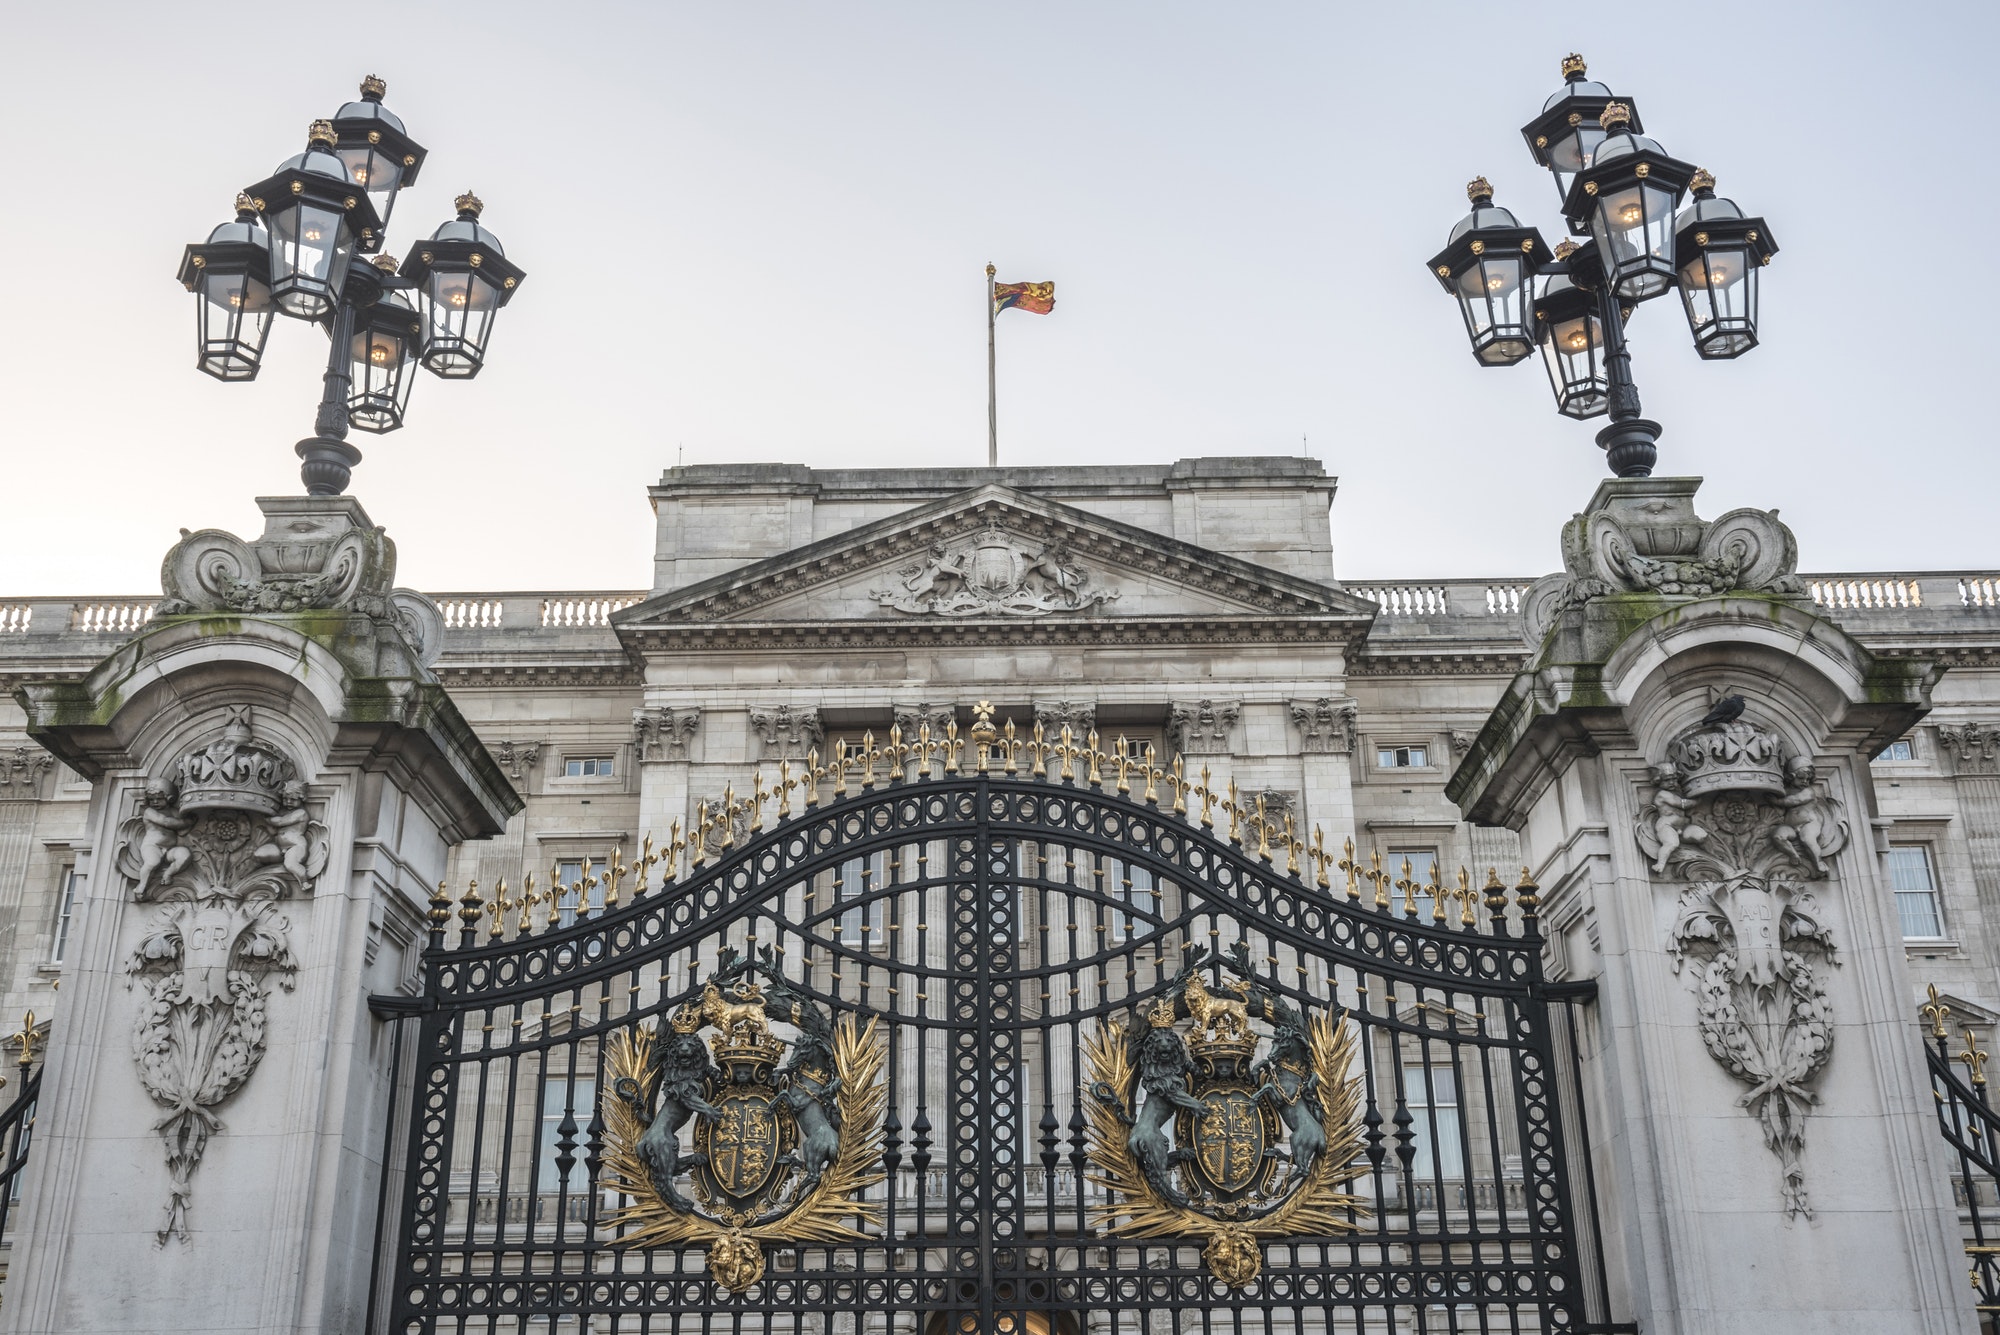 Royal Coat of Arms and the gates at Buckingham Palace, London, England